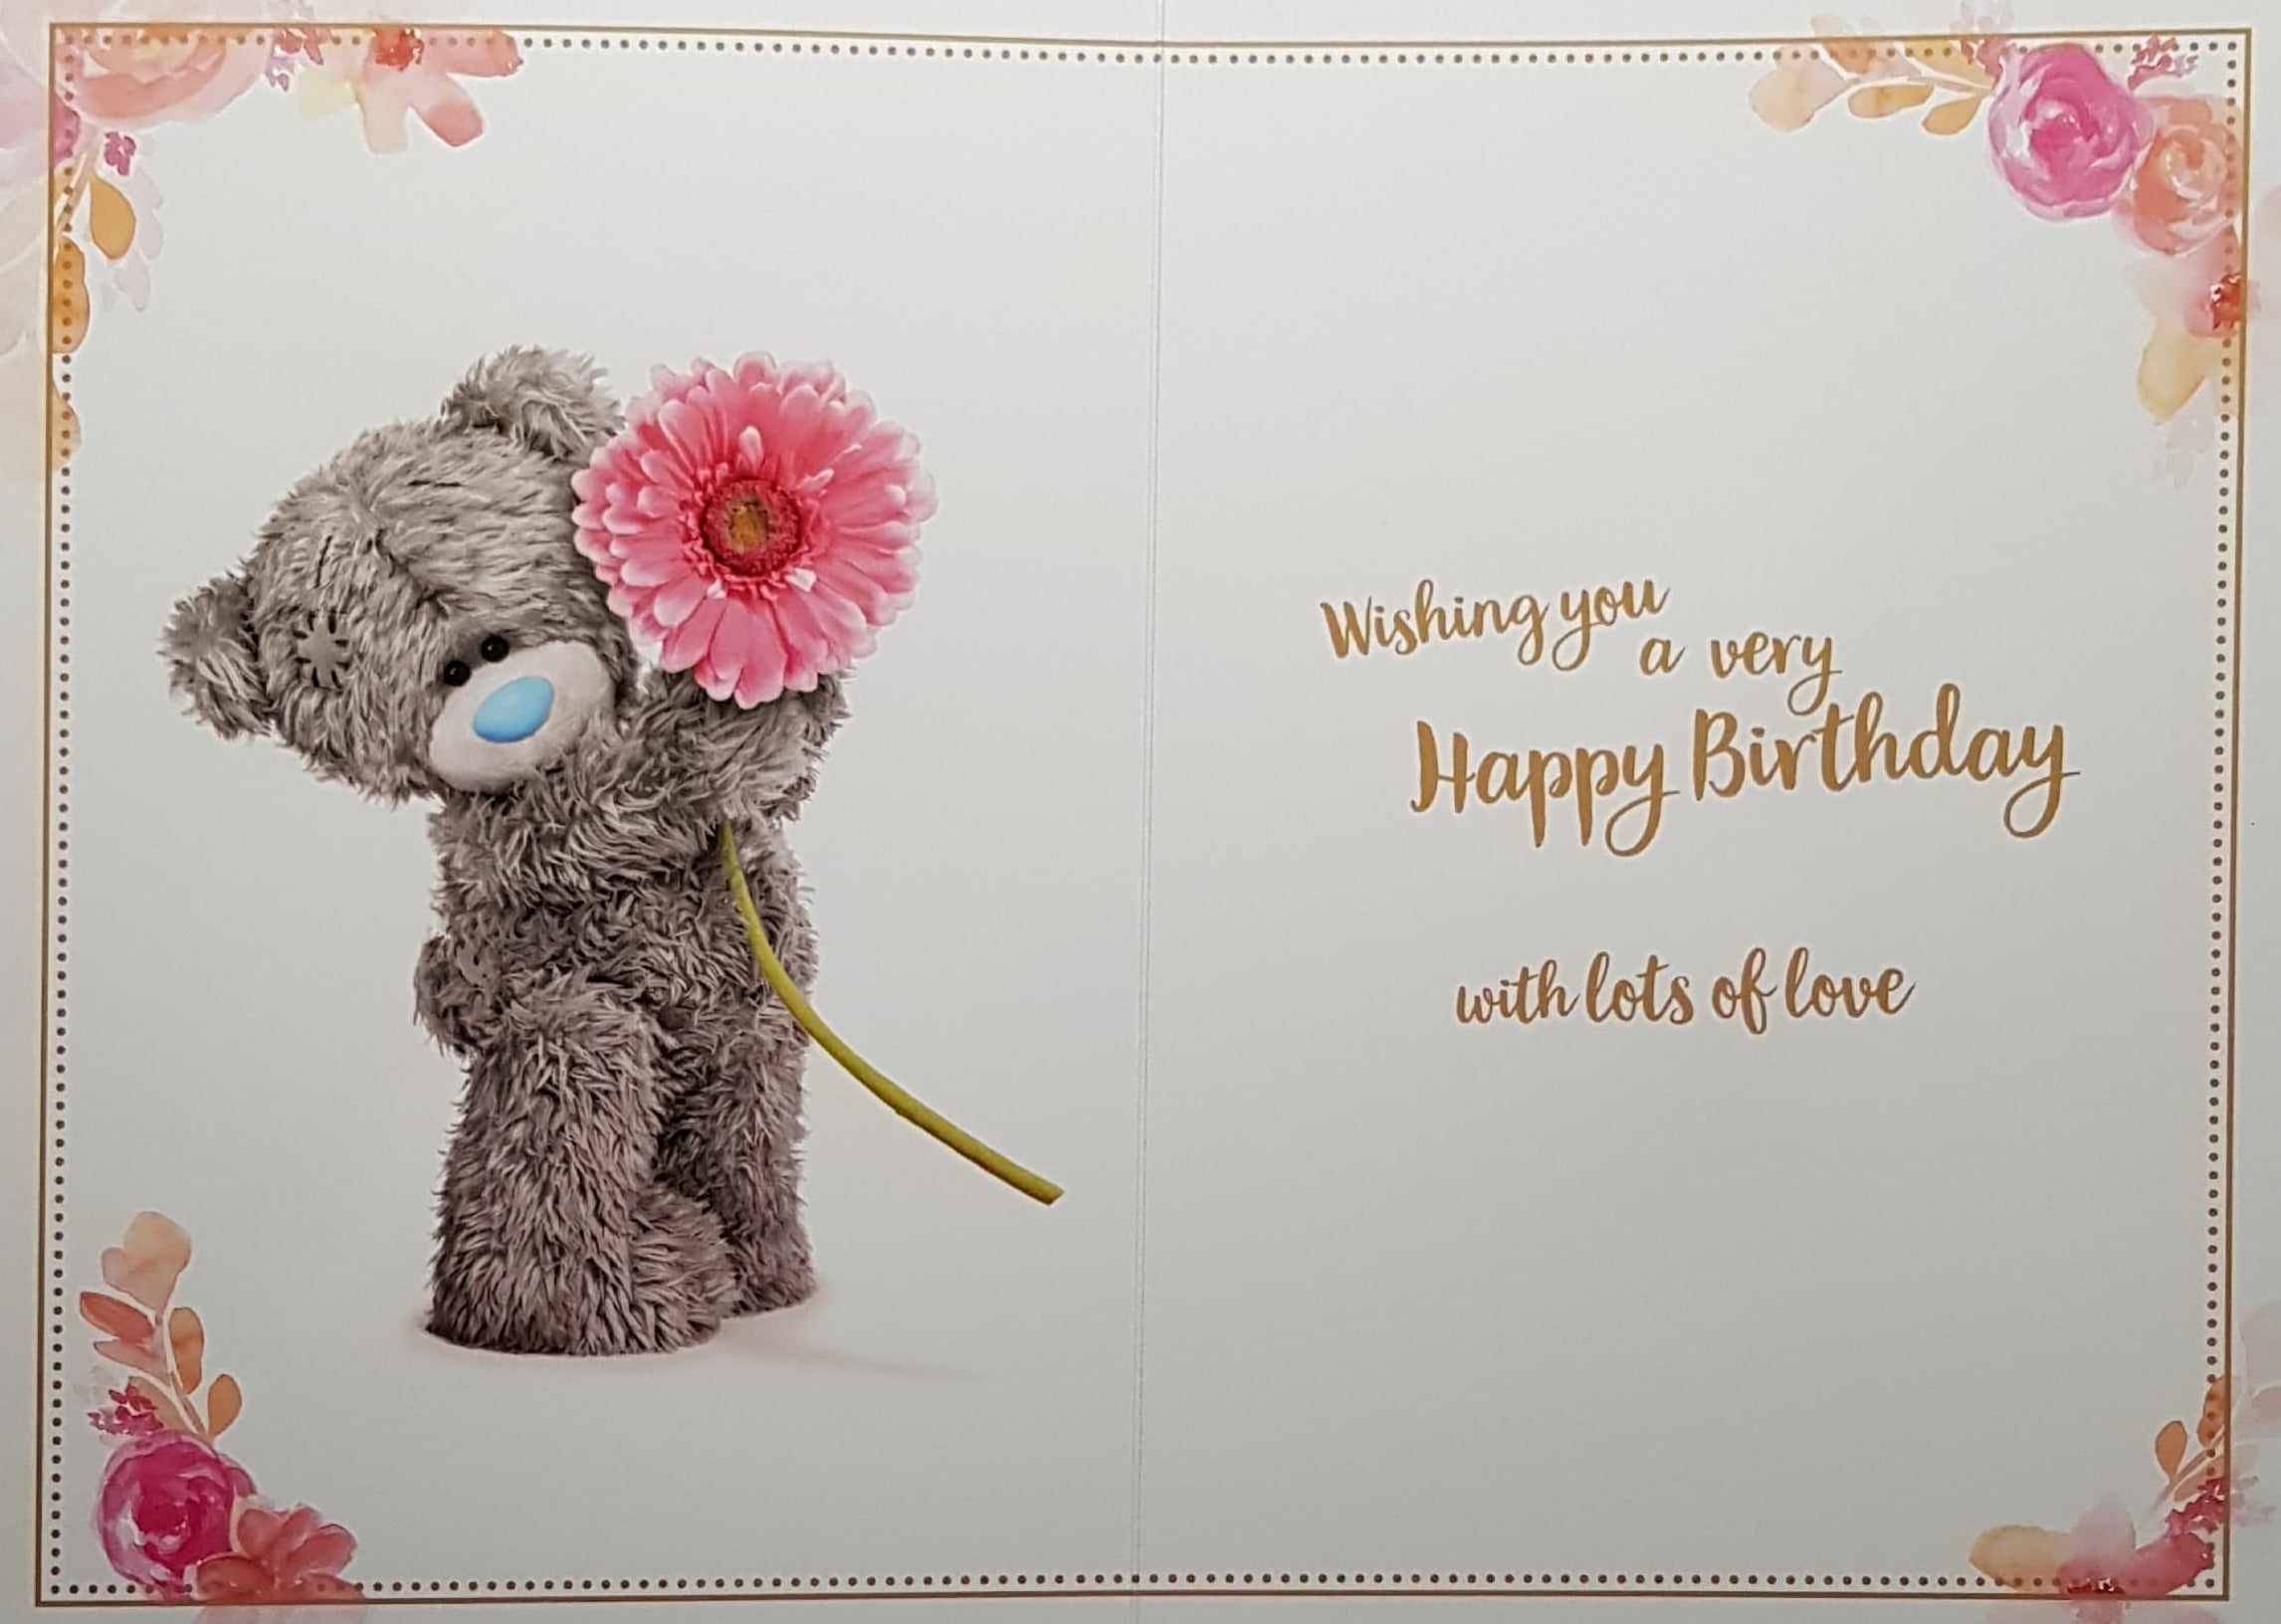 Birthday Card - Daughter / Fluffy Teddy Bear Holding Up A Pink Flower (3D Card)